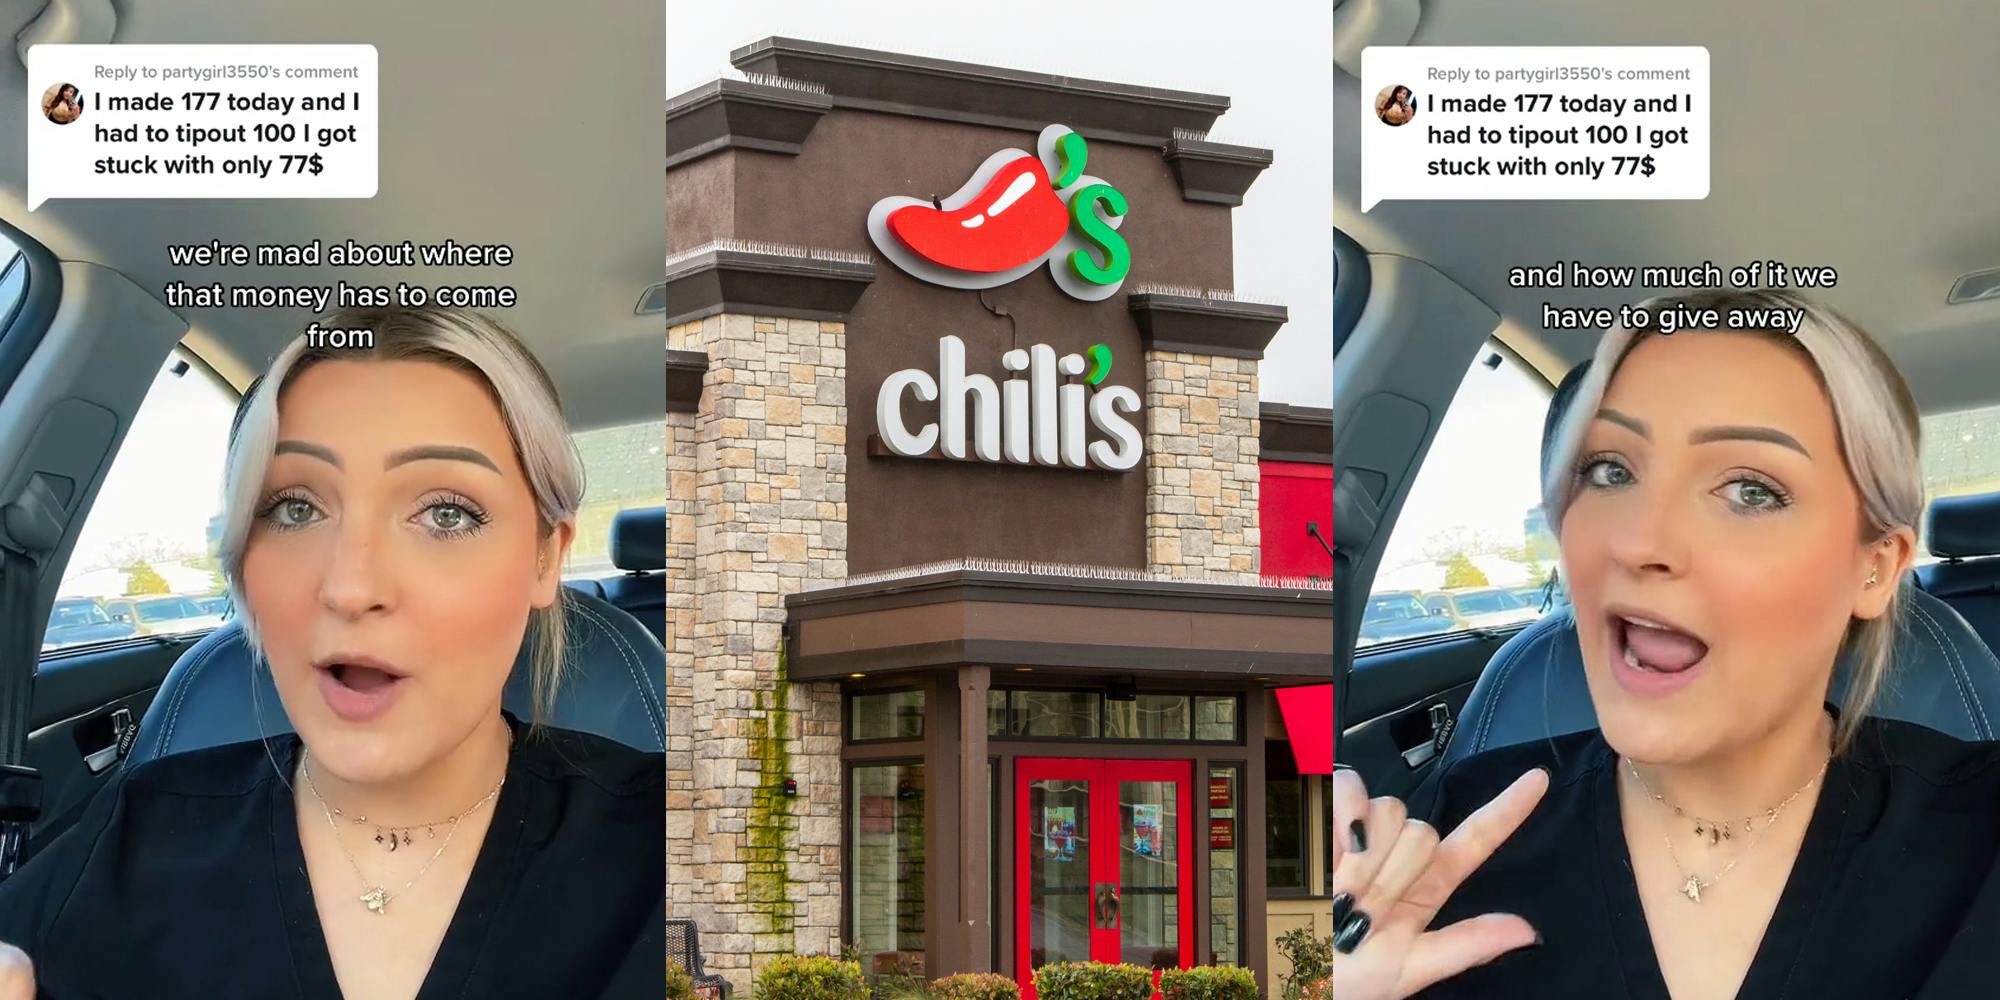 Chili's employee speaking in car with caption "I made 177 today and I had to tipout 100 I got stuck with only $77" "we're mad about where that money has to come ftom" (l) Chili's building with sign (c) Chili's employee speaking in car with caption "I made 177 today and I had to tipout 100 I got stuck with only $77" "and how much of it we have to give away" (r)